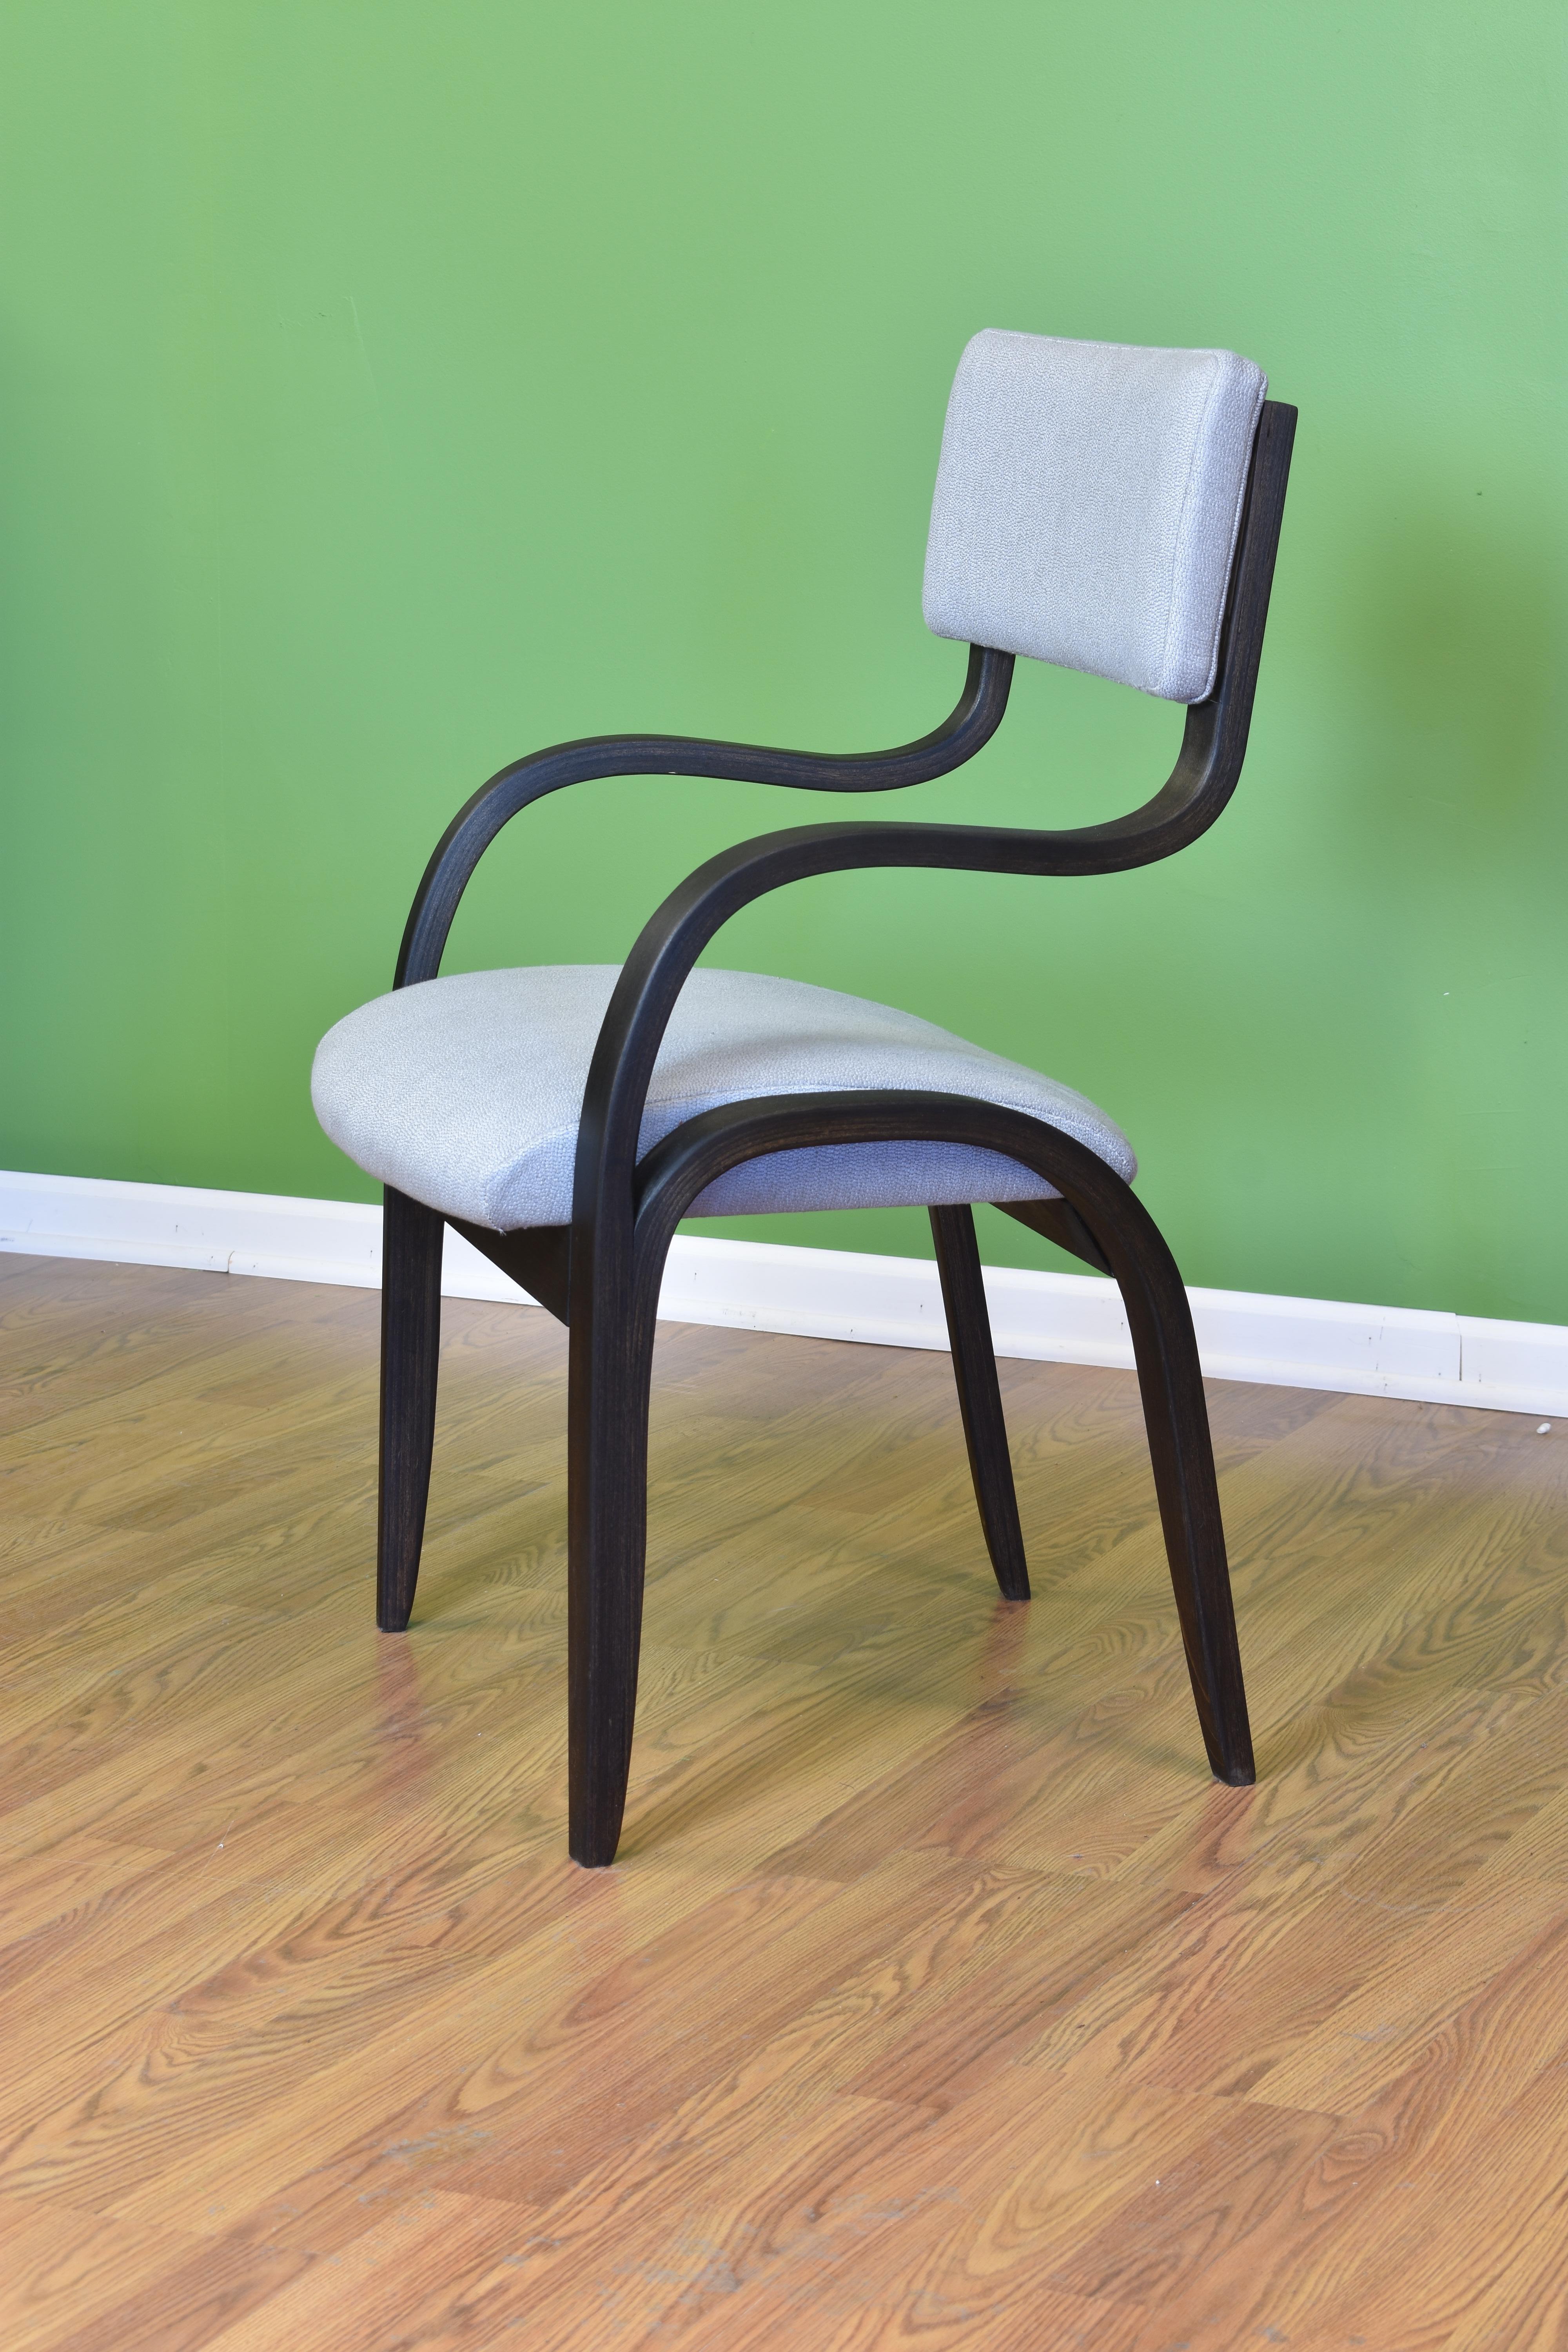 This dining chair is constructed using the bent lamination processes. The back flexes when leaned upon for extreme ergonomic comfort. Strong and Sturdy. Graceful curved parts makes for an elegant look and feel.
All our work is original, signed,